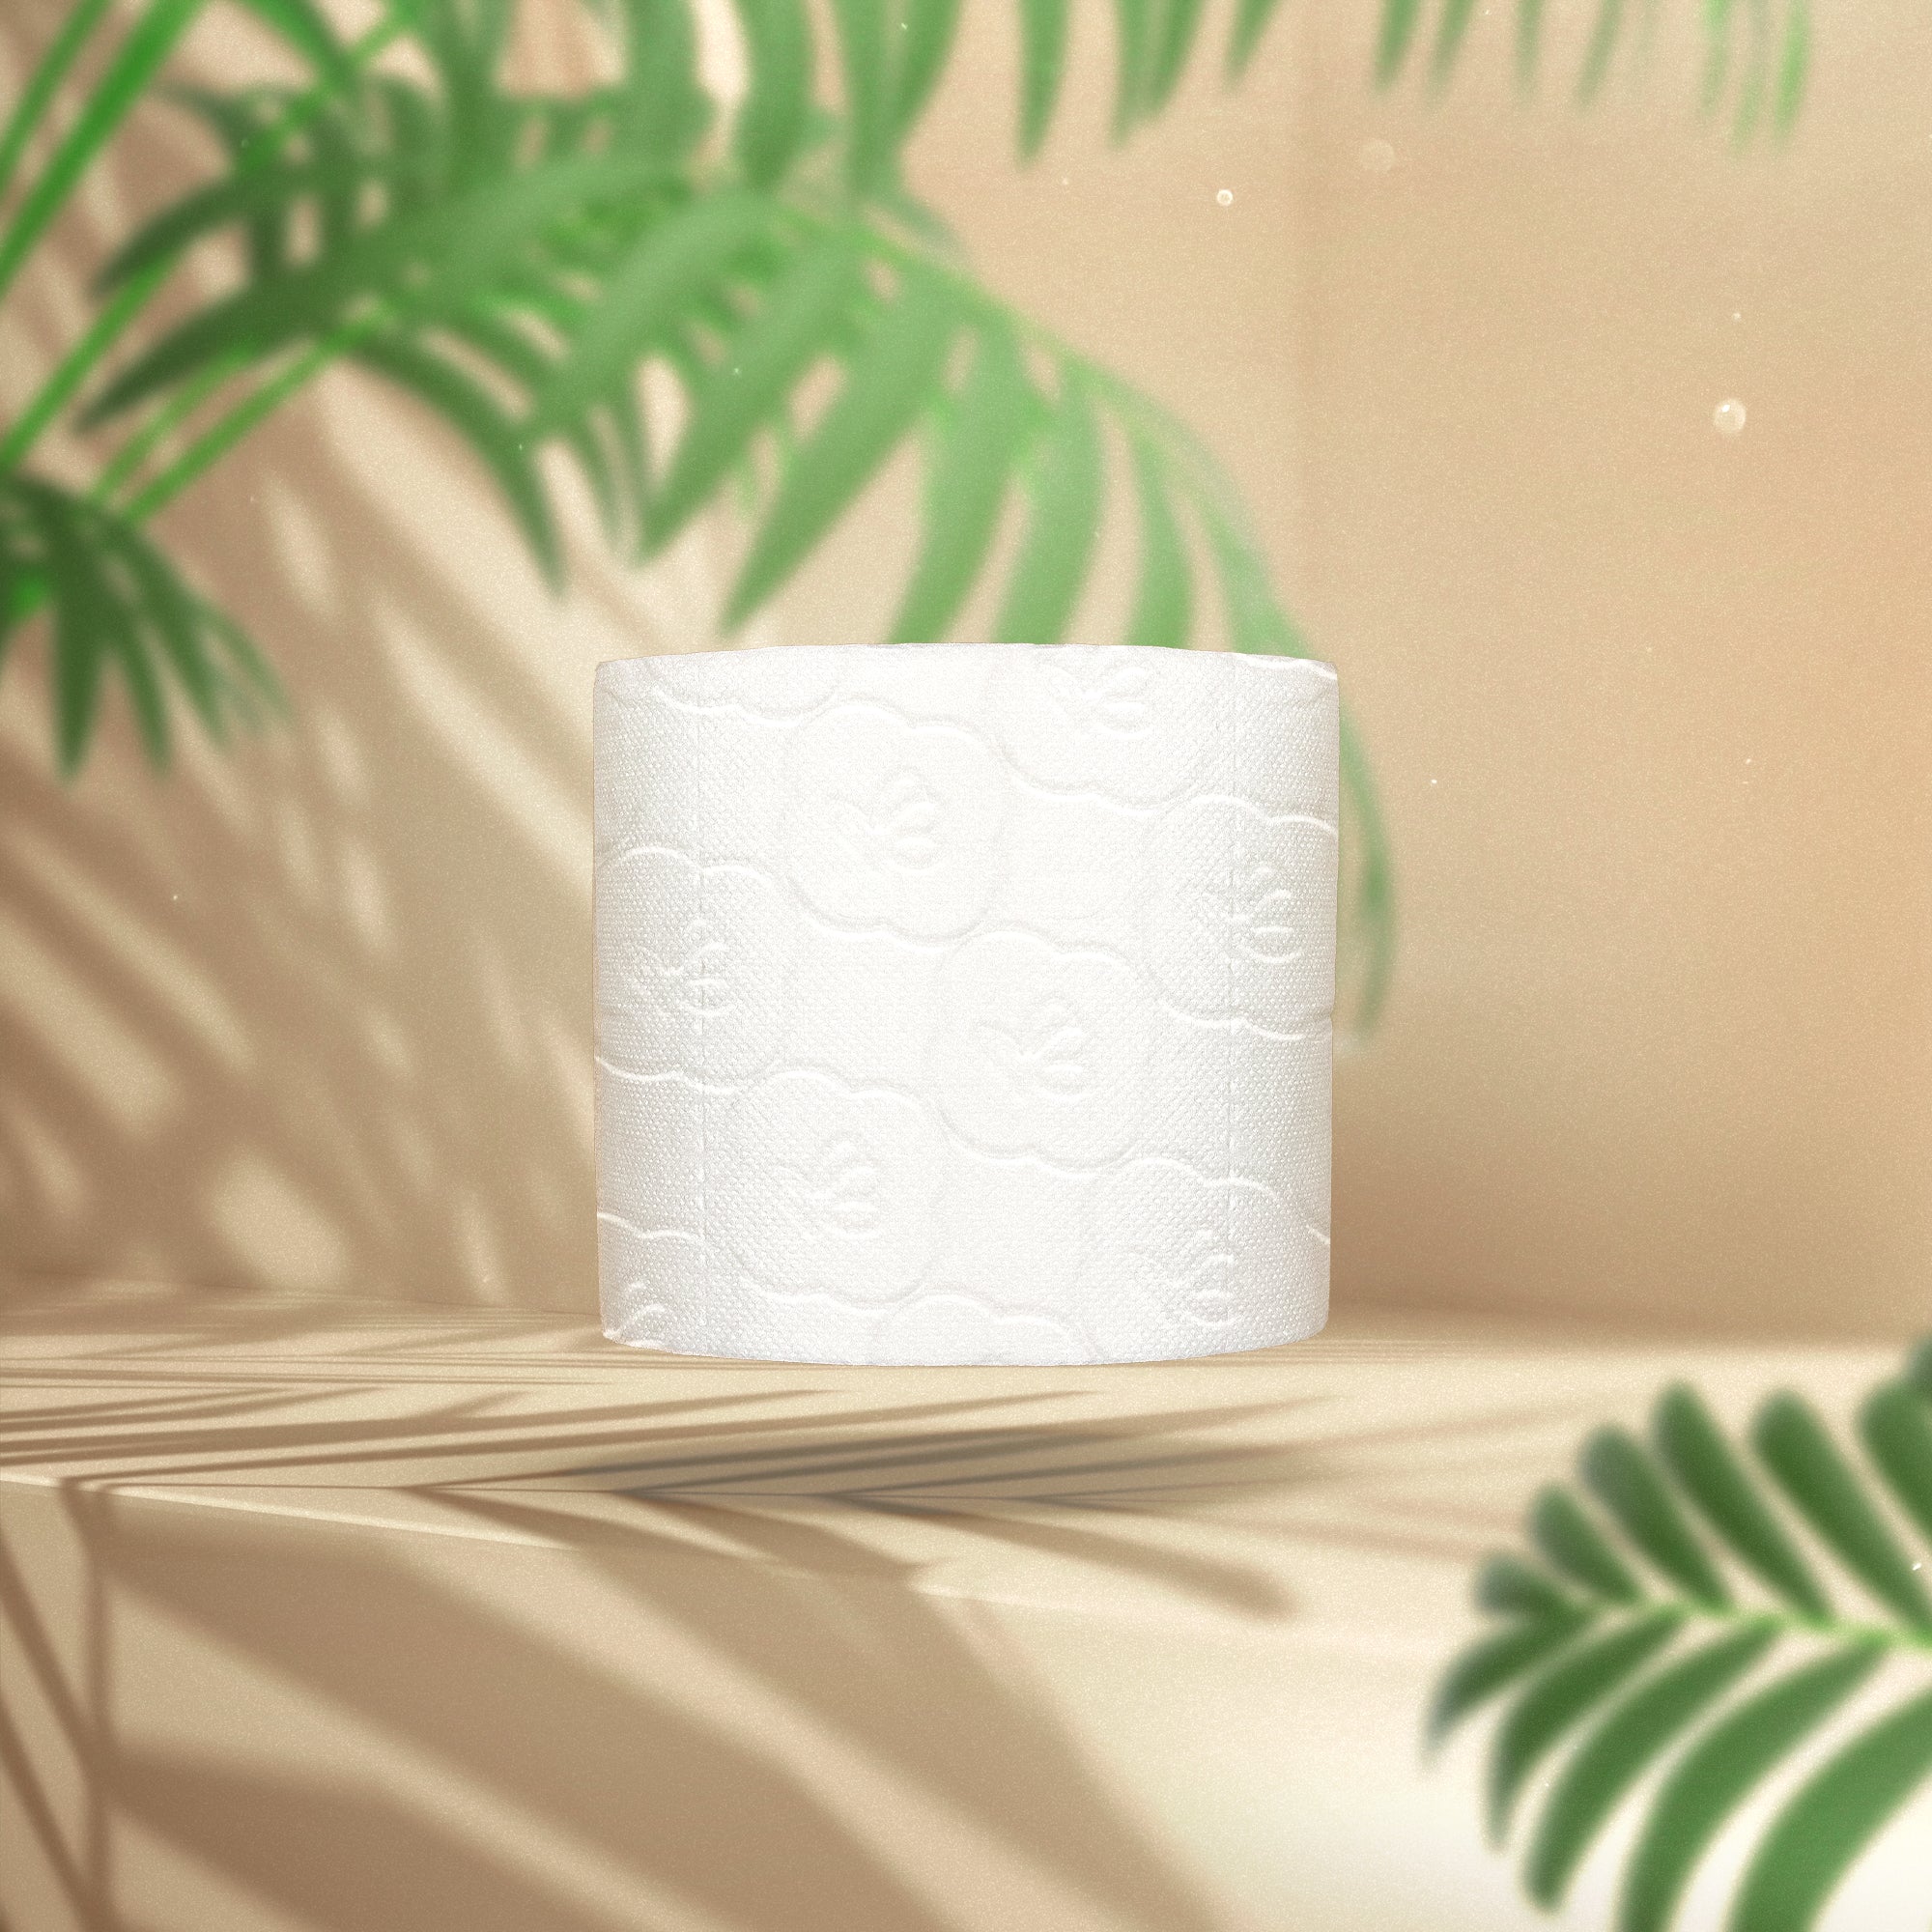 Sample Eco-Friendly 3-Ply Sugarcane Toilet Paper Roll